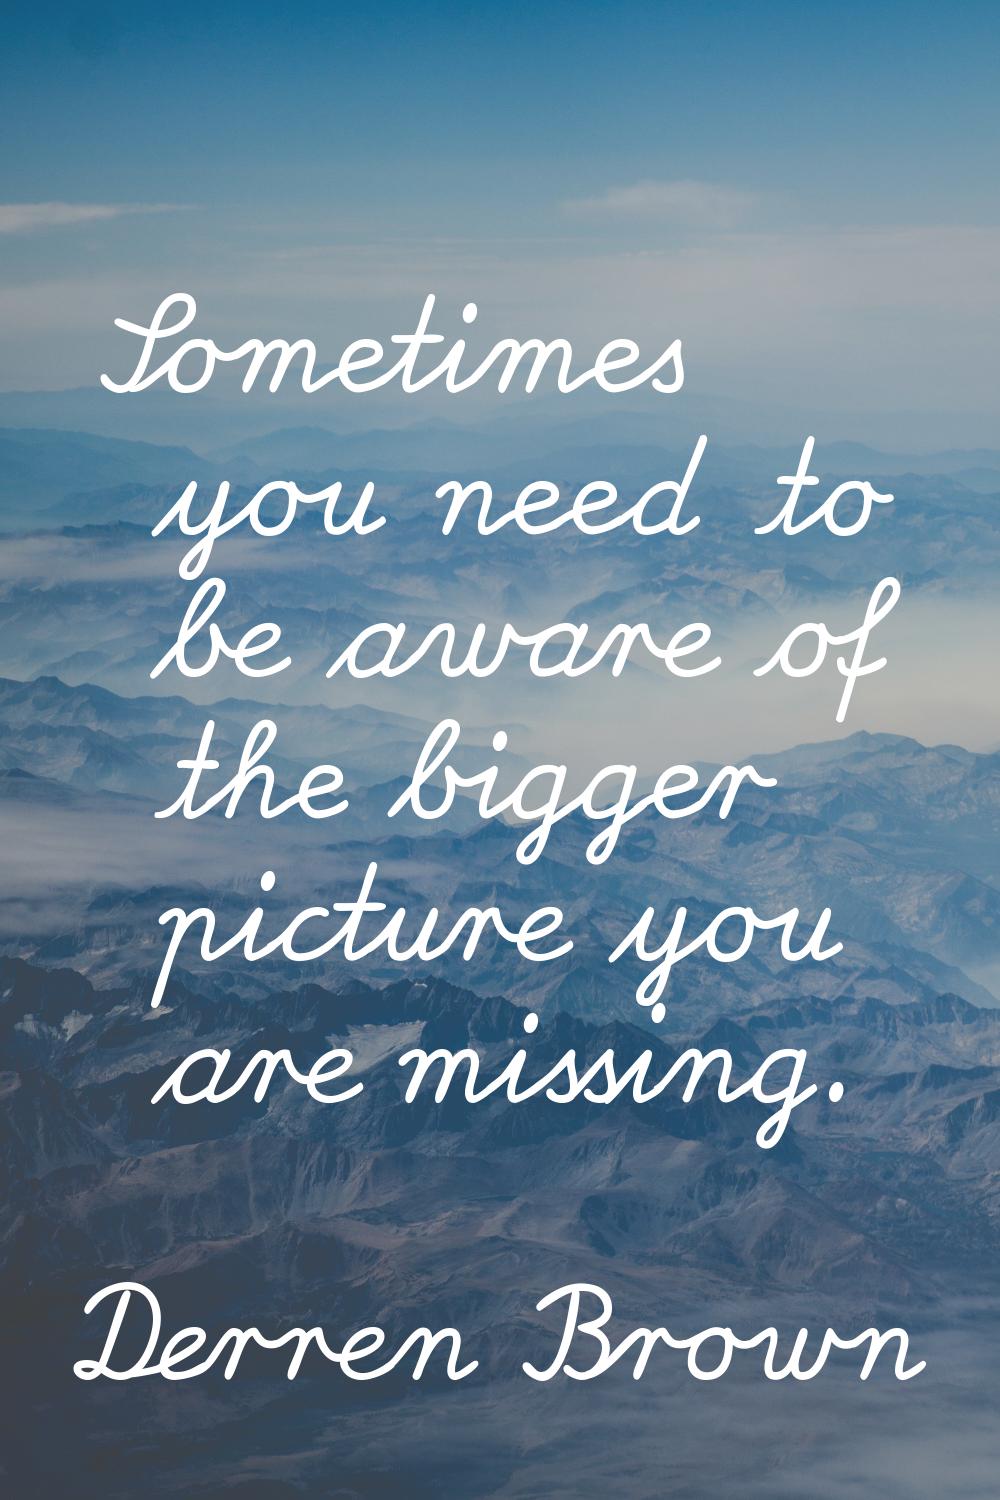 Sometimes you need to be aware of the bigger picture you are missing.